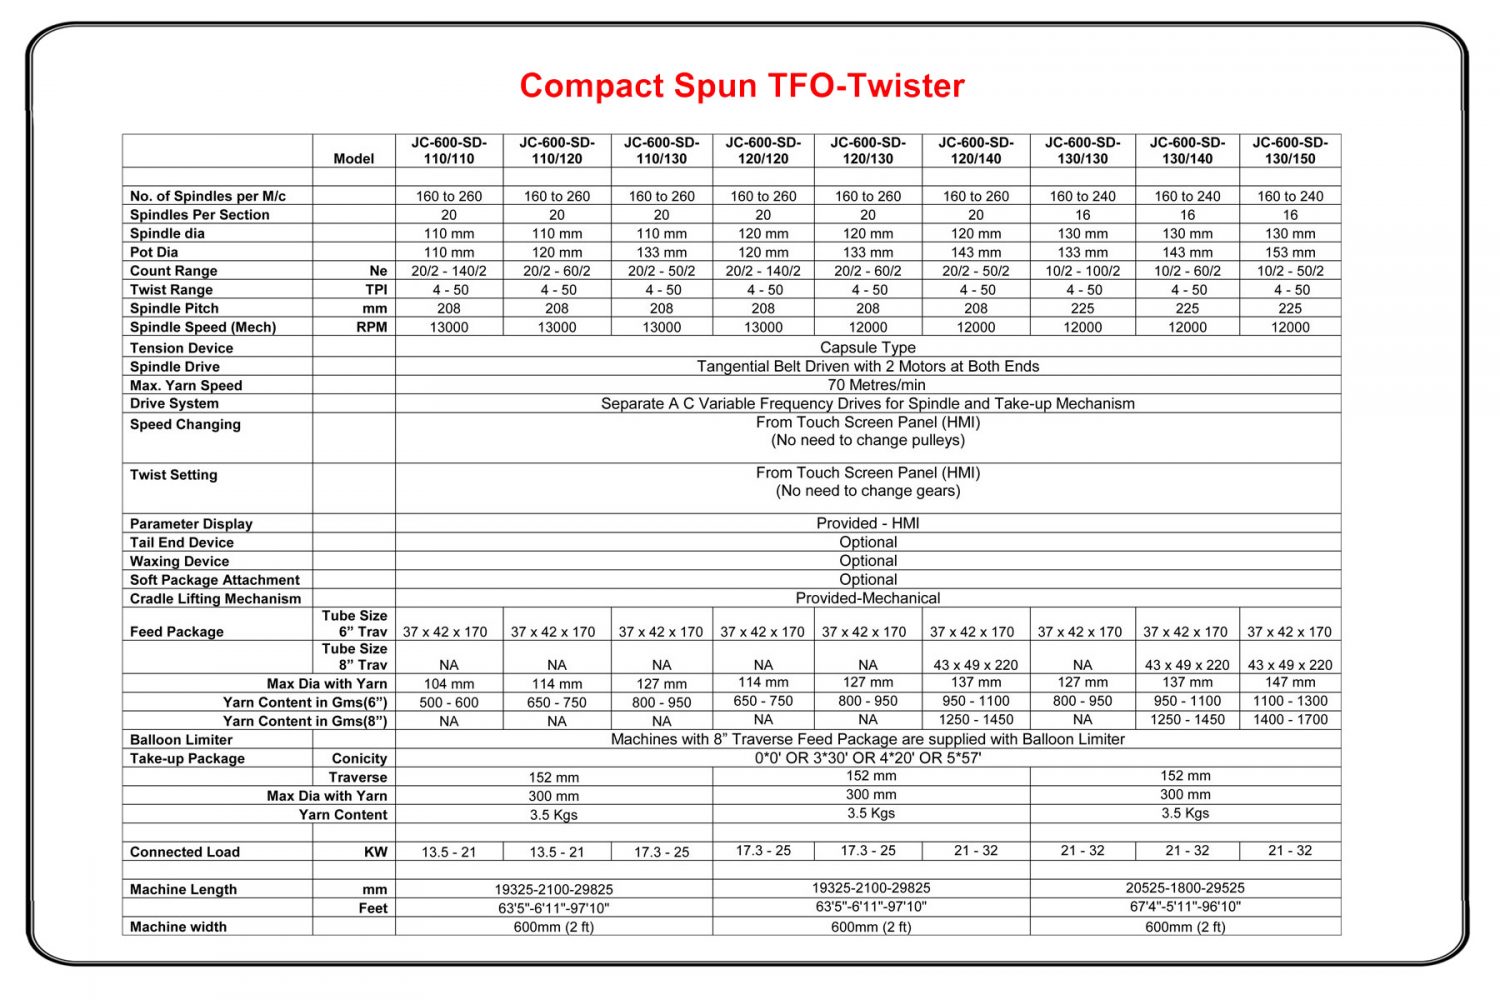 Compact TFO Cotton / Spun Yarn TFO Technical Specifications